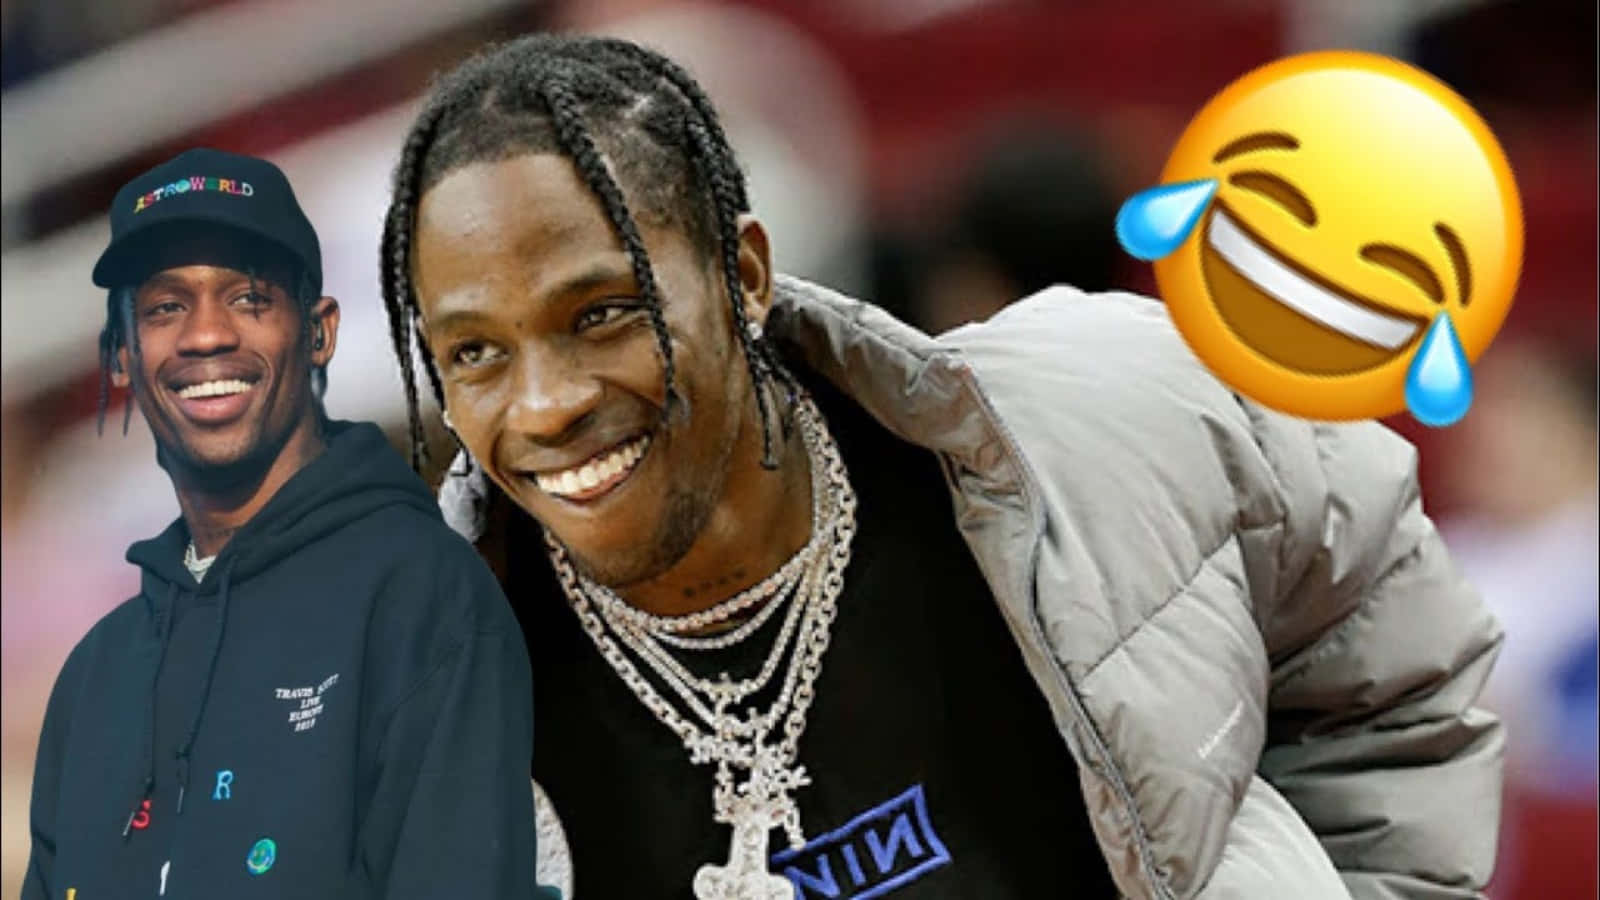 "Laughing it up with Travis Scott"